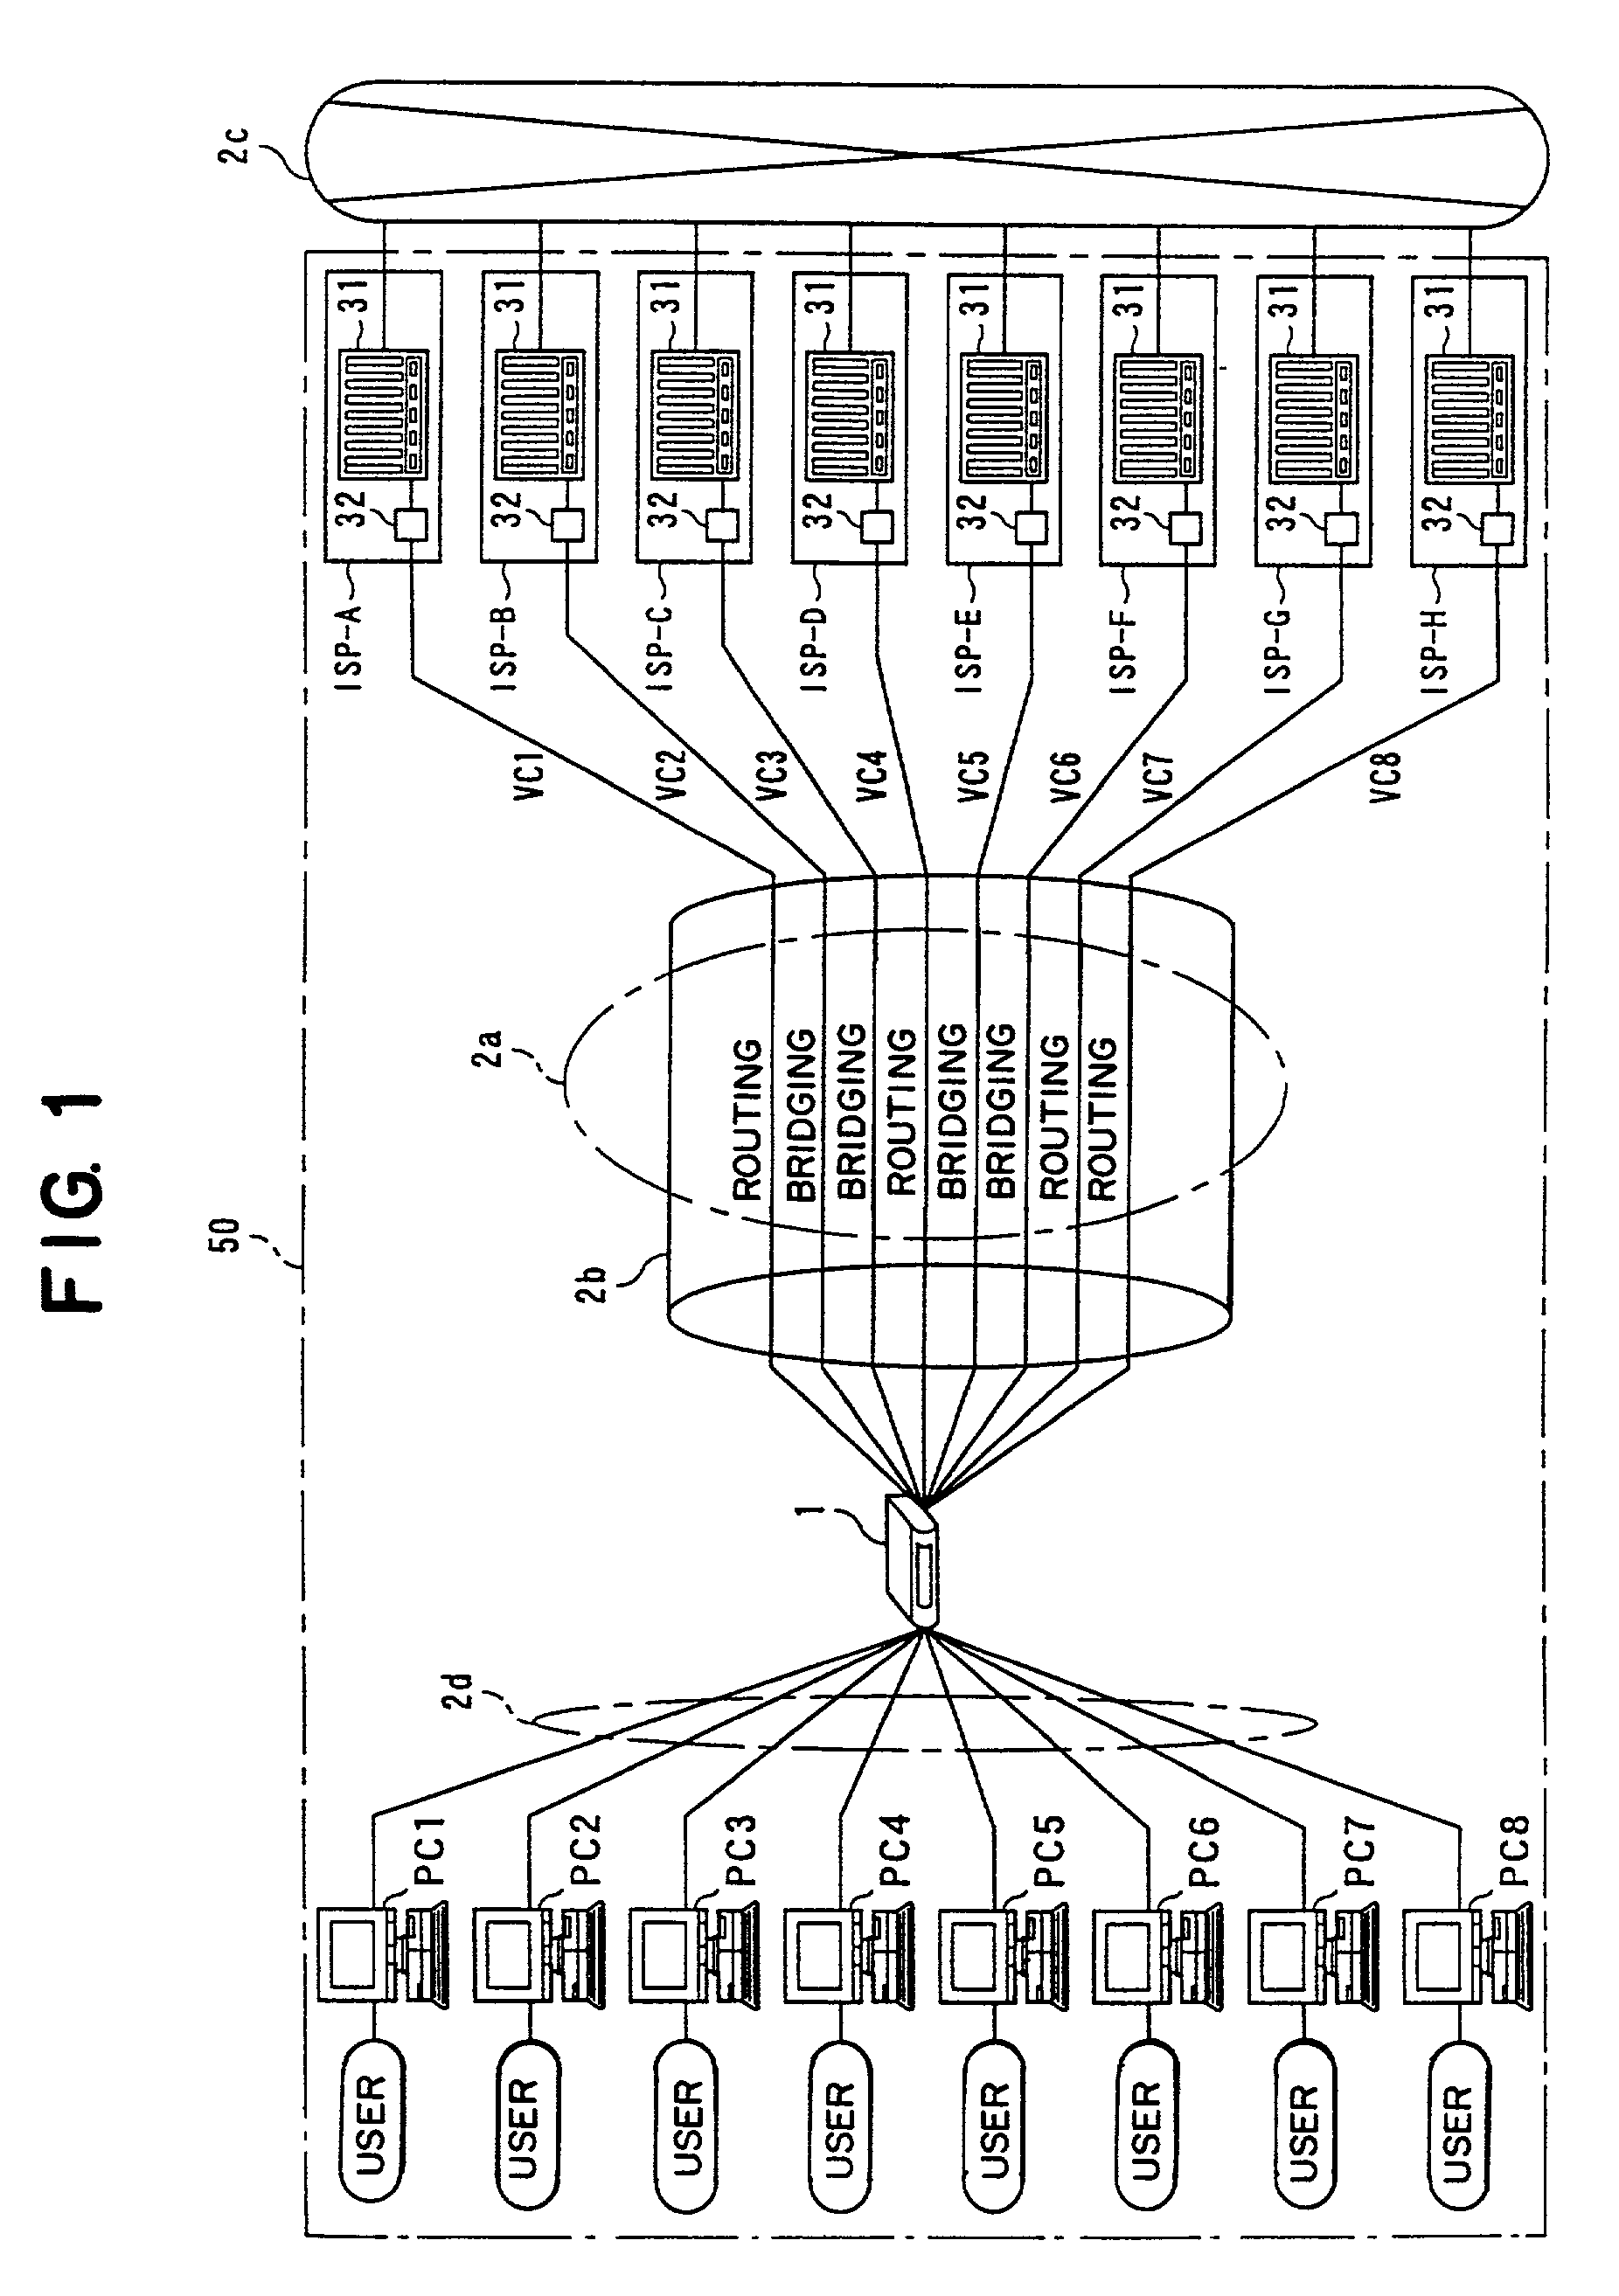 Subscriber terminating apparatus and packet processing method